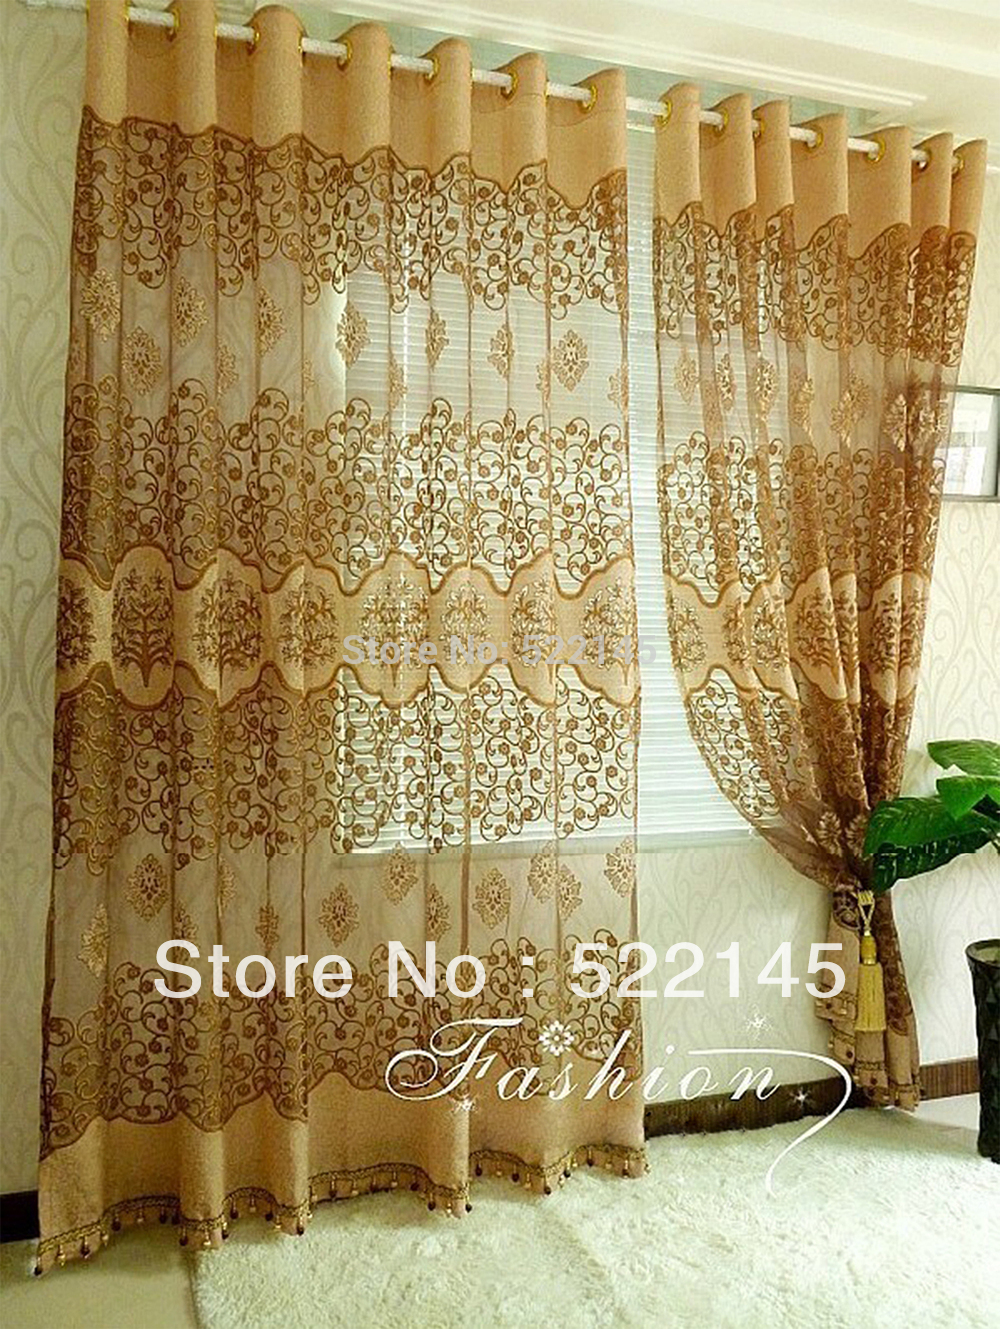 Country Curtains Fishkill Ny Country Shower Curtains Rusti